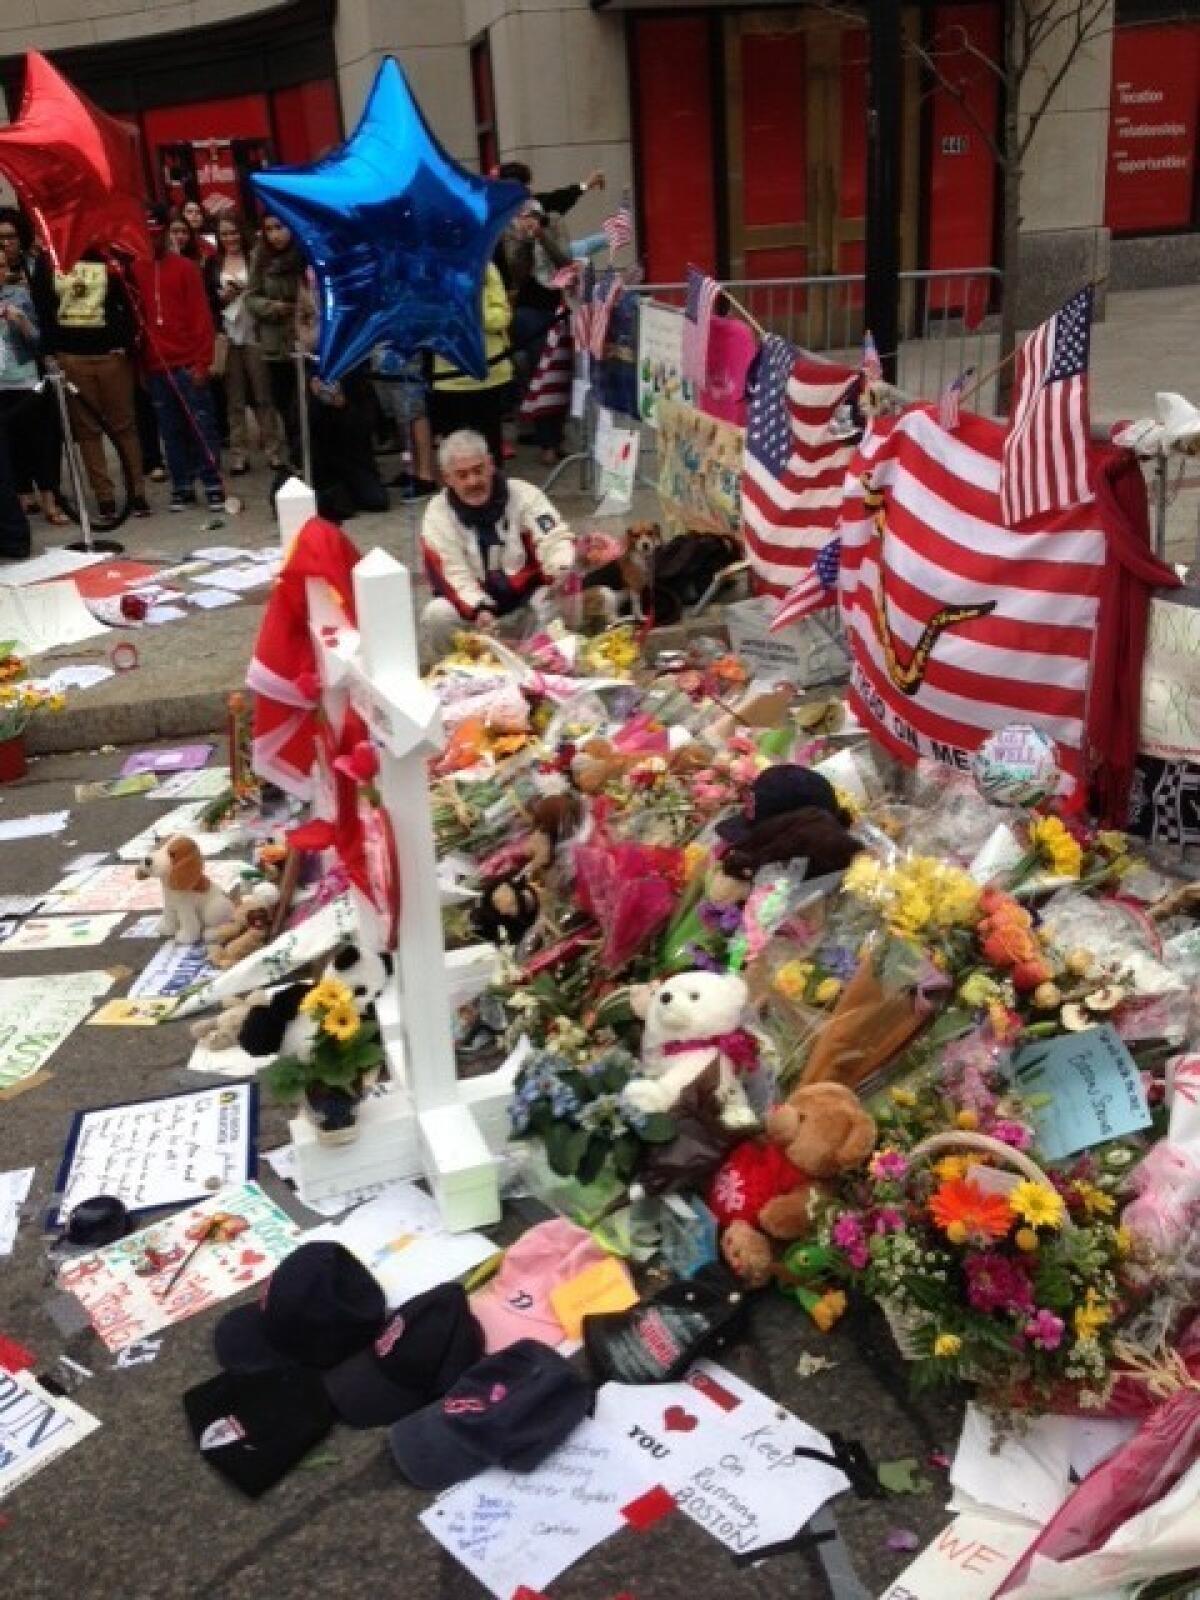 In Boston, a memorial for victims of the marathon bombings continues to grow.